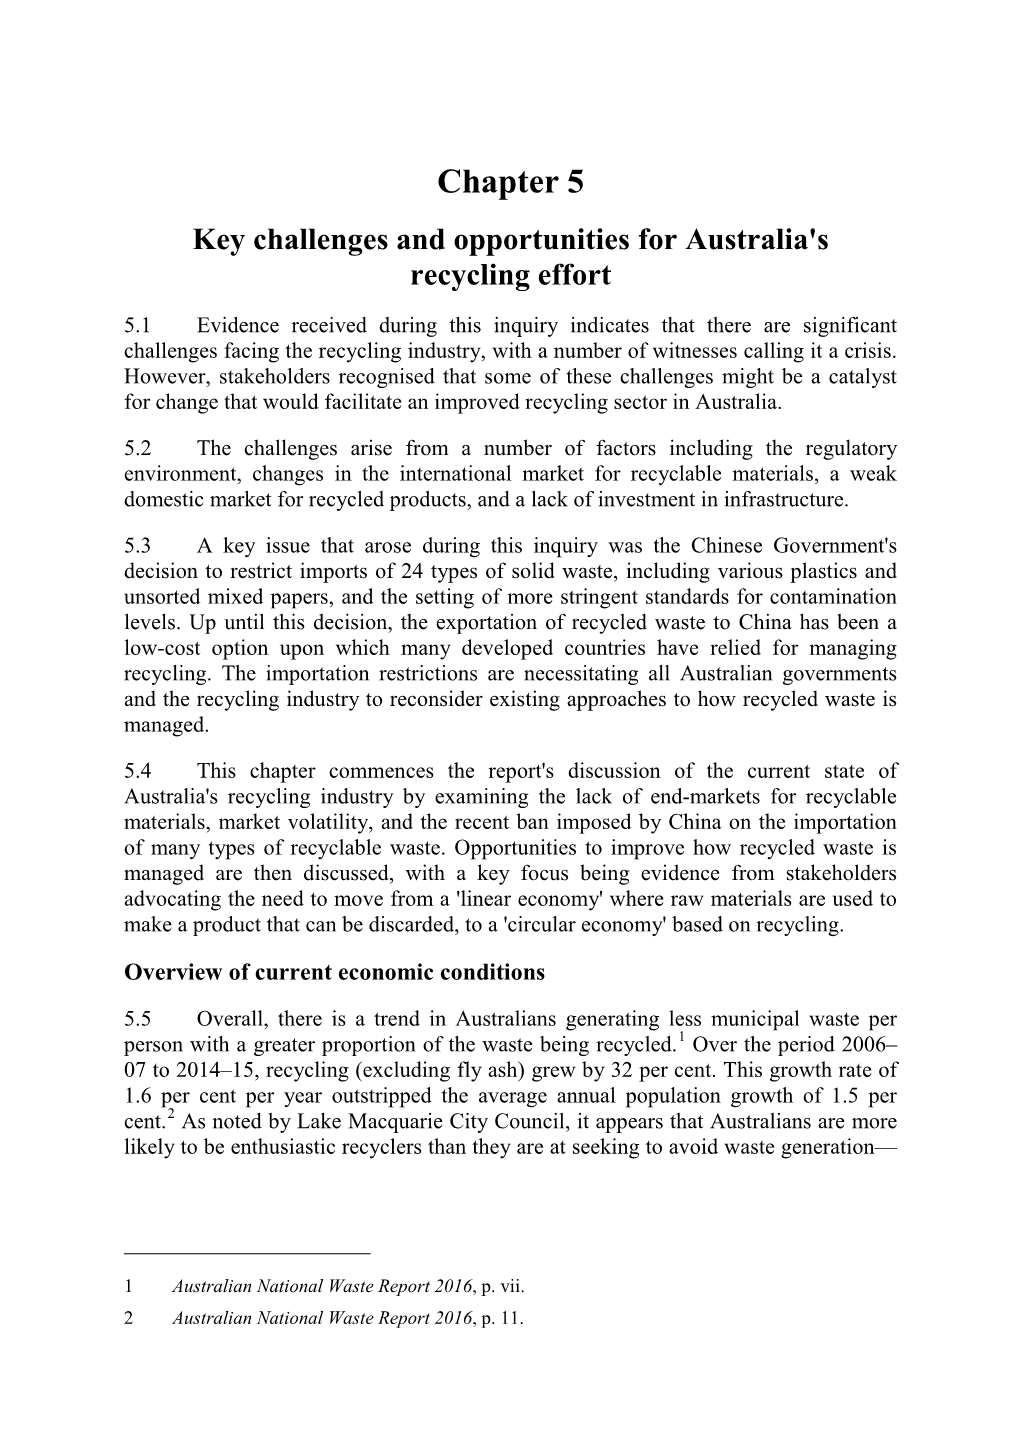 Chapter 5 Key Challenges and Opportunities for Australia's Recycling Effort